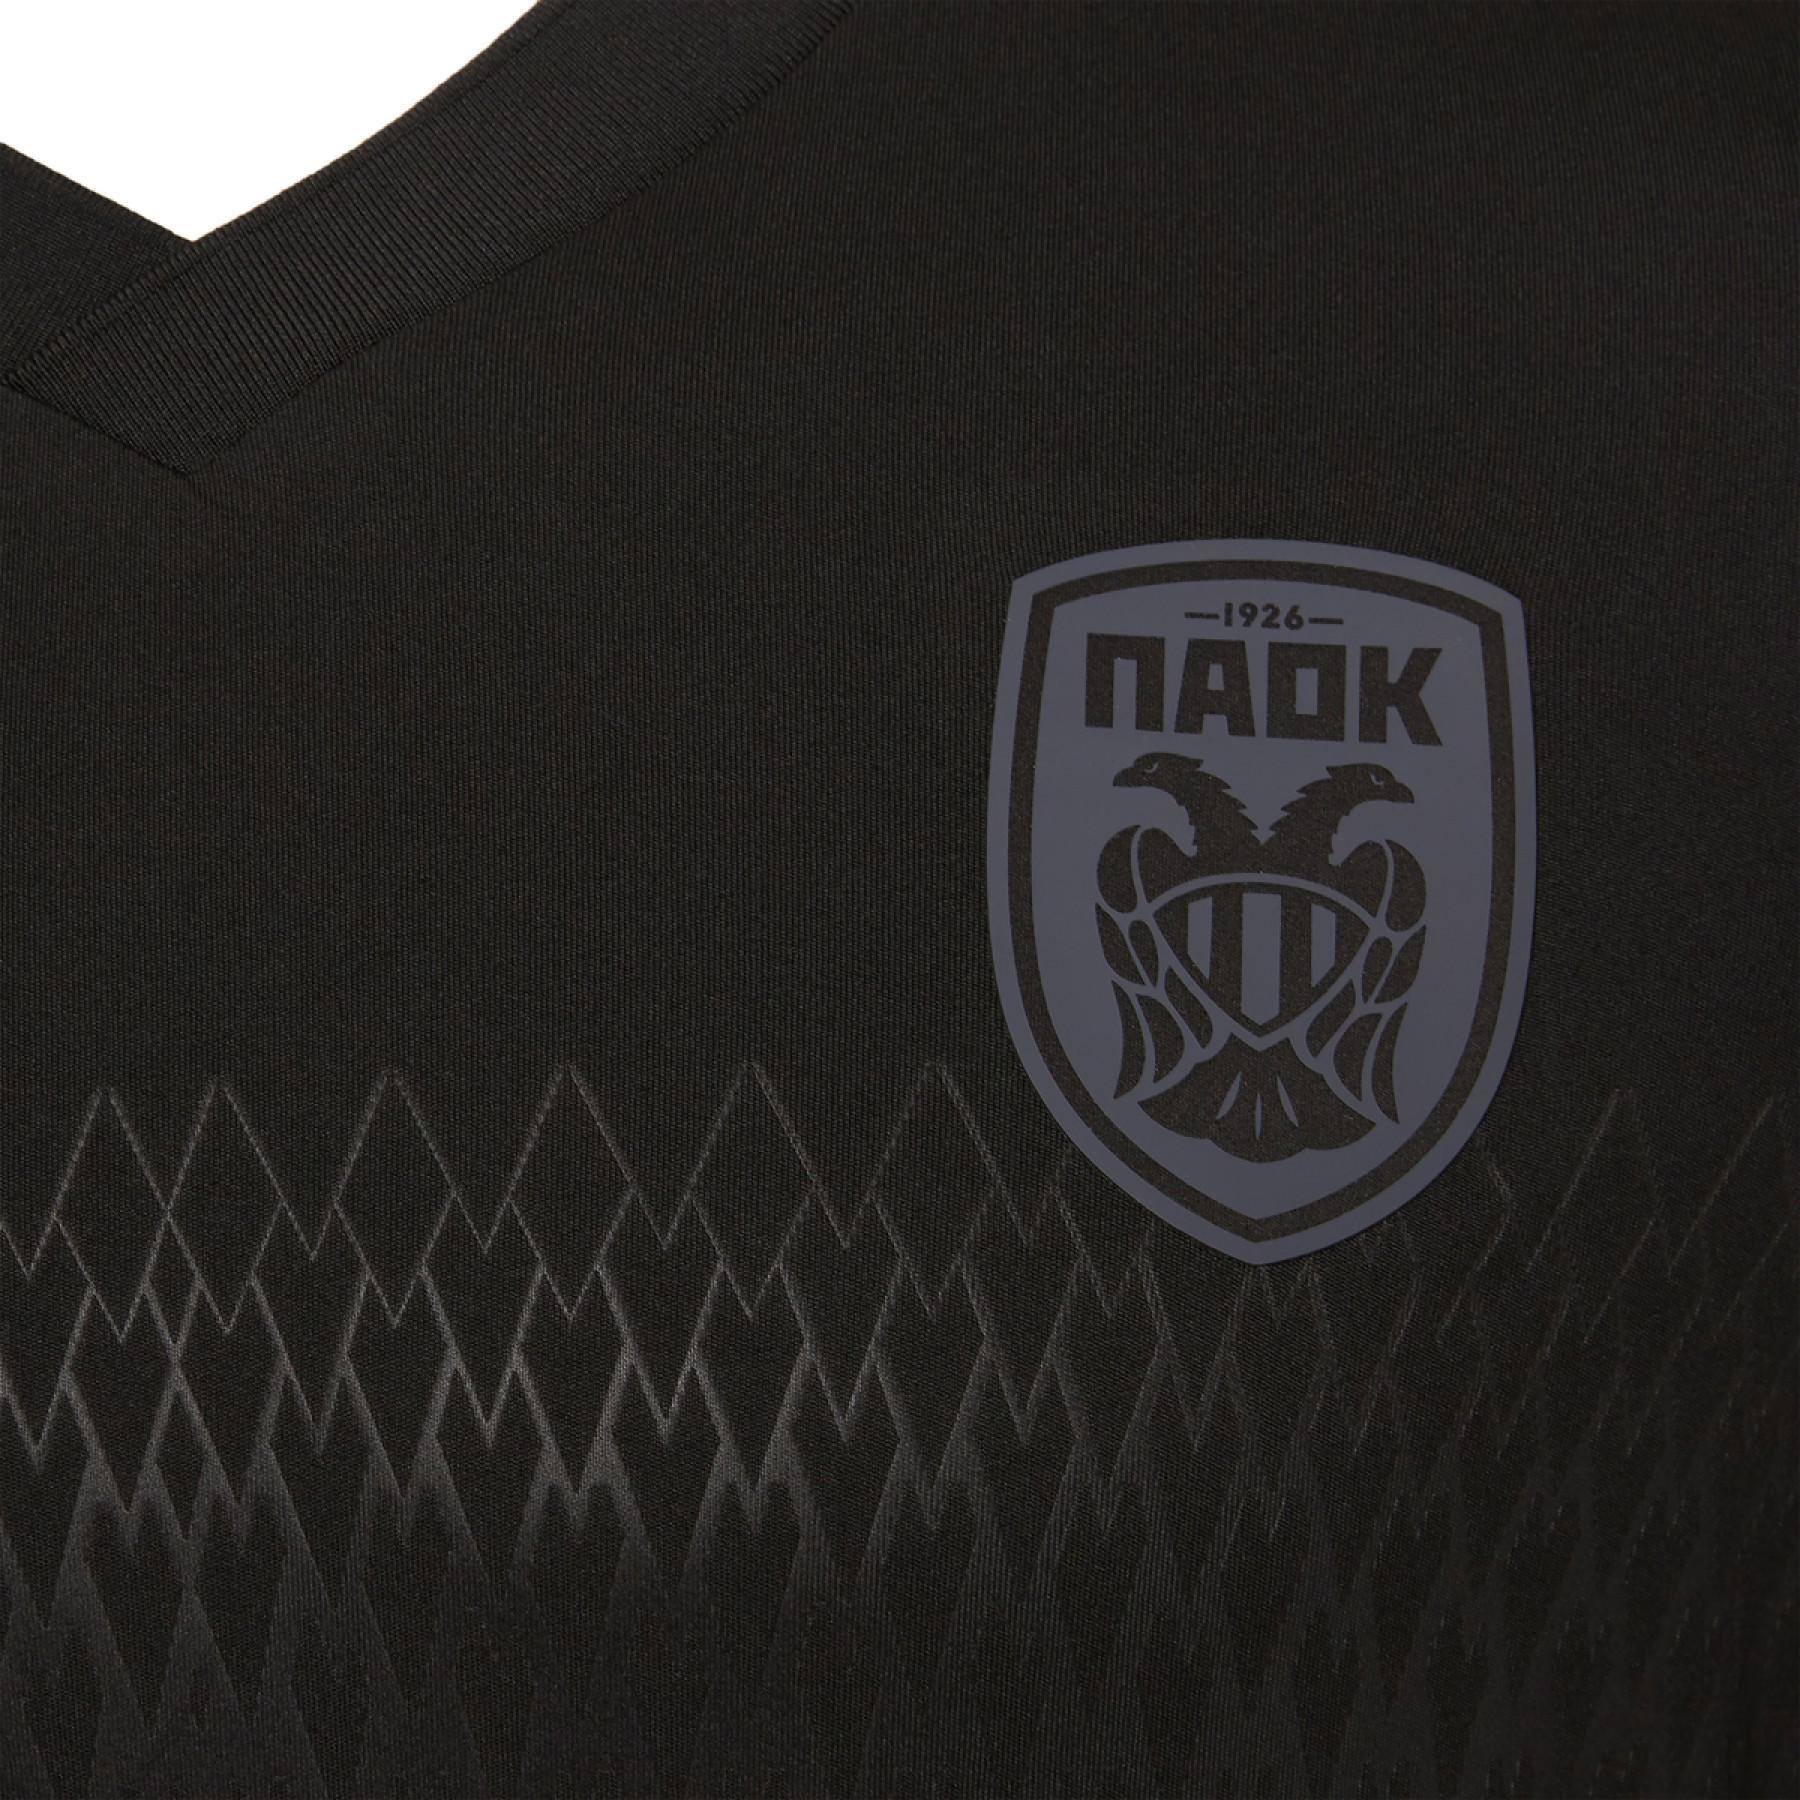 Away jersey PAOK Salonique 2020/21